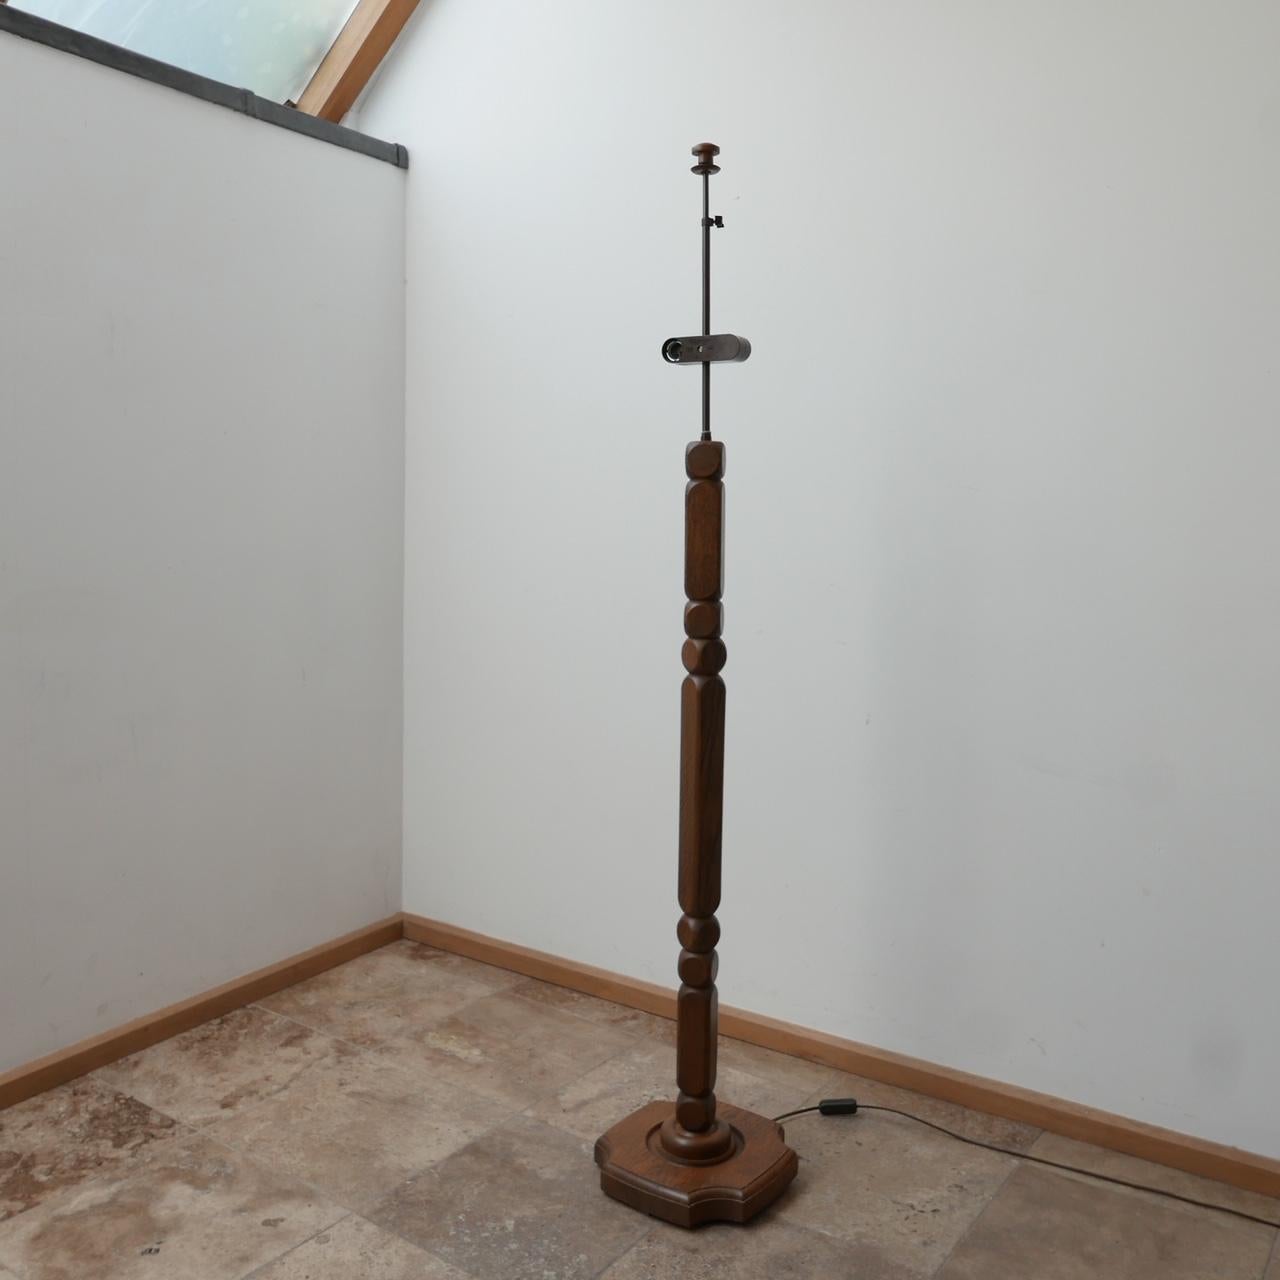 A turned oak floor lamp of geometric forms. 

Belgium, c1960s. 

Good condition. 

Re-wired and PAT tested. 

Dimensions: 170 H x 31 W x 31 D in cm. 

Delivery: POA.

